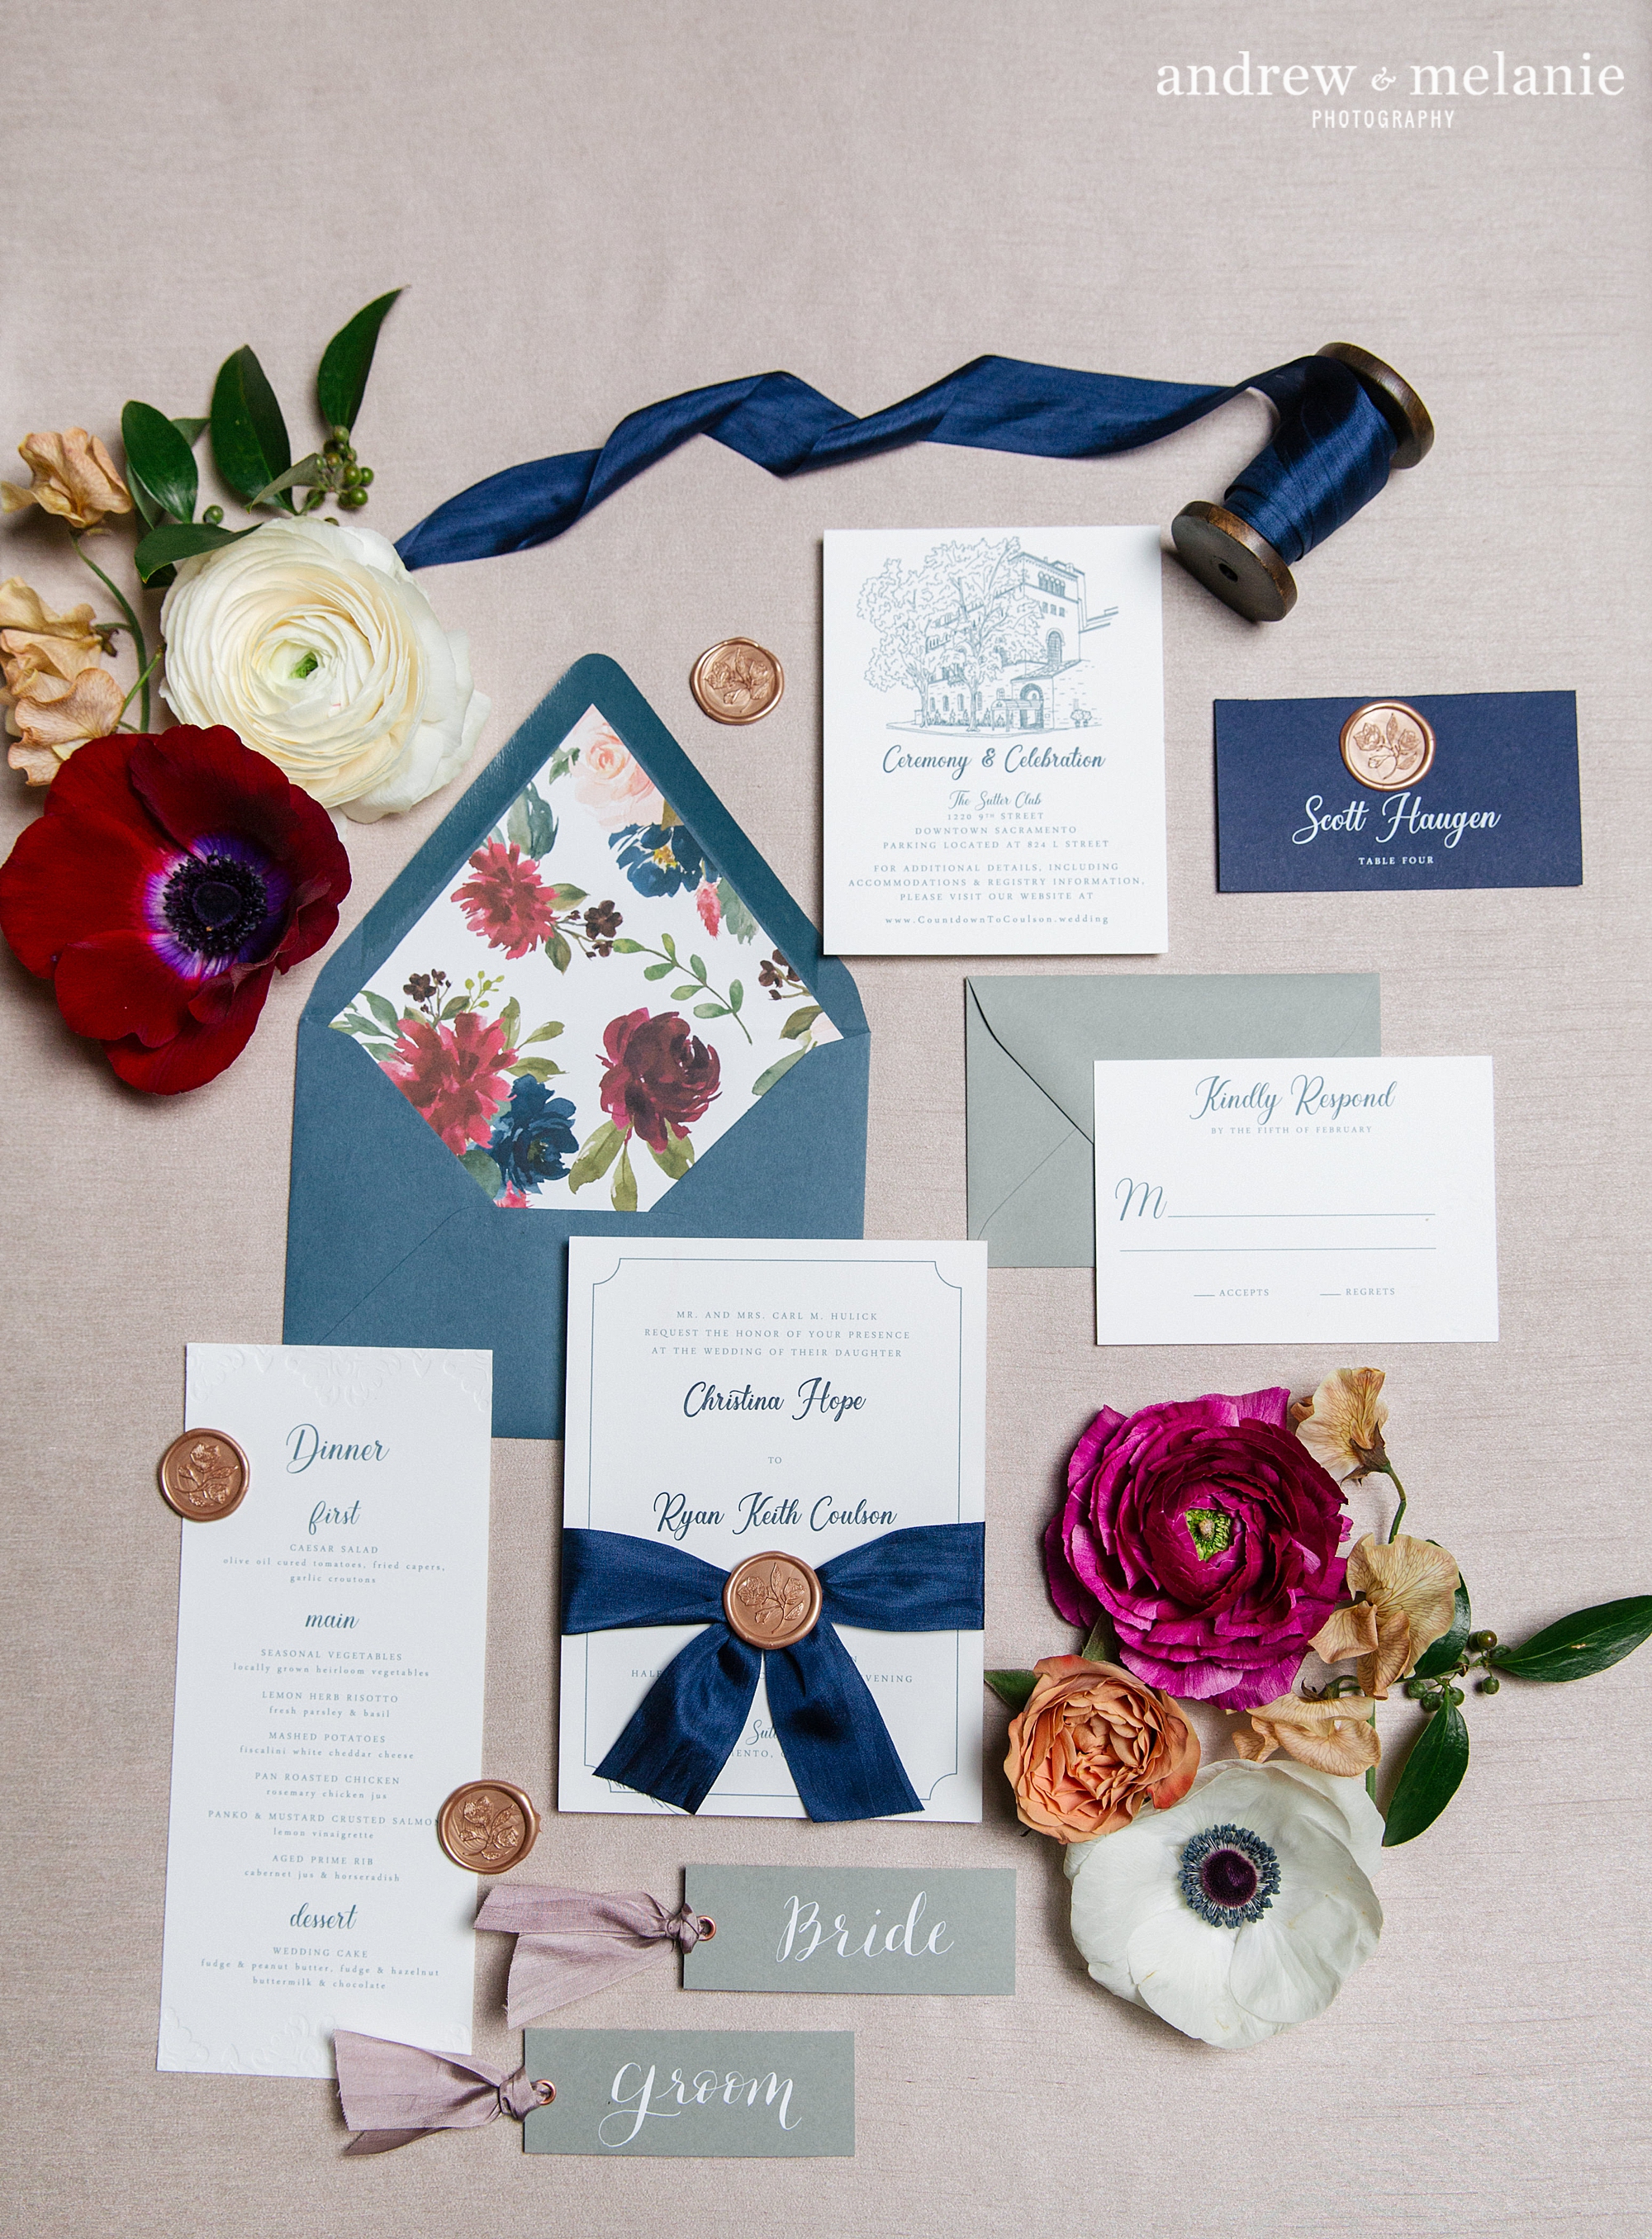 Wedding paper suite by little bird paper compnay. Photo by Andrew & Melanie Photography